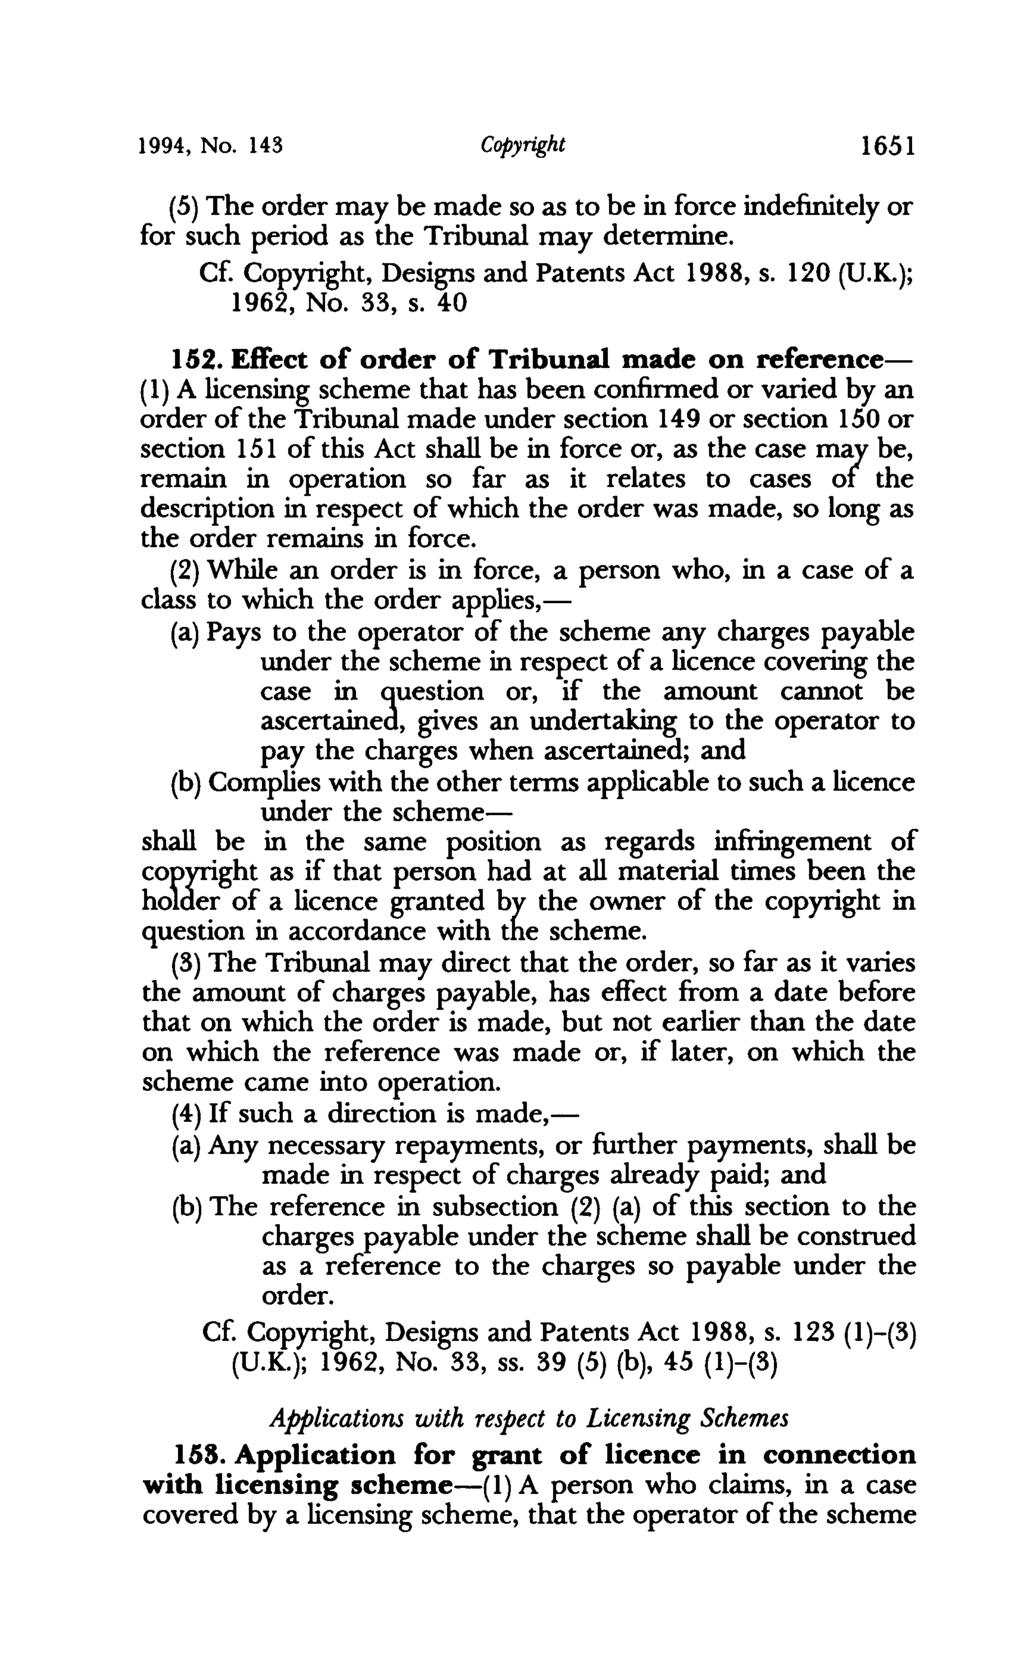 1994, No. 143 Copyright 1651 (5) The order may be made so as to be in force indefinitely or for such period as the Tribunal may determine. Cf. Copyright, Designs and Patents Act 1988, s. 120 (U.K.